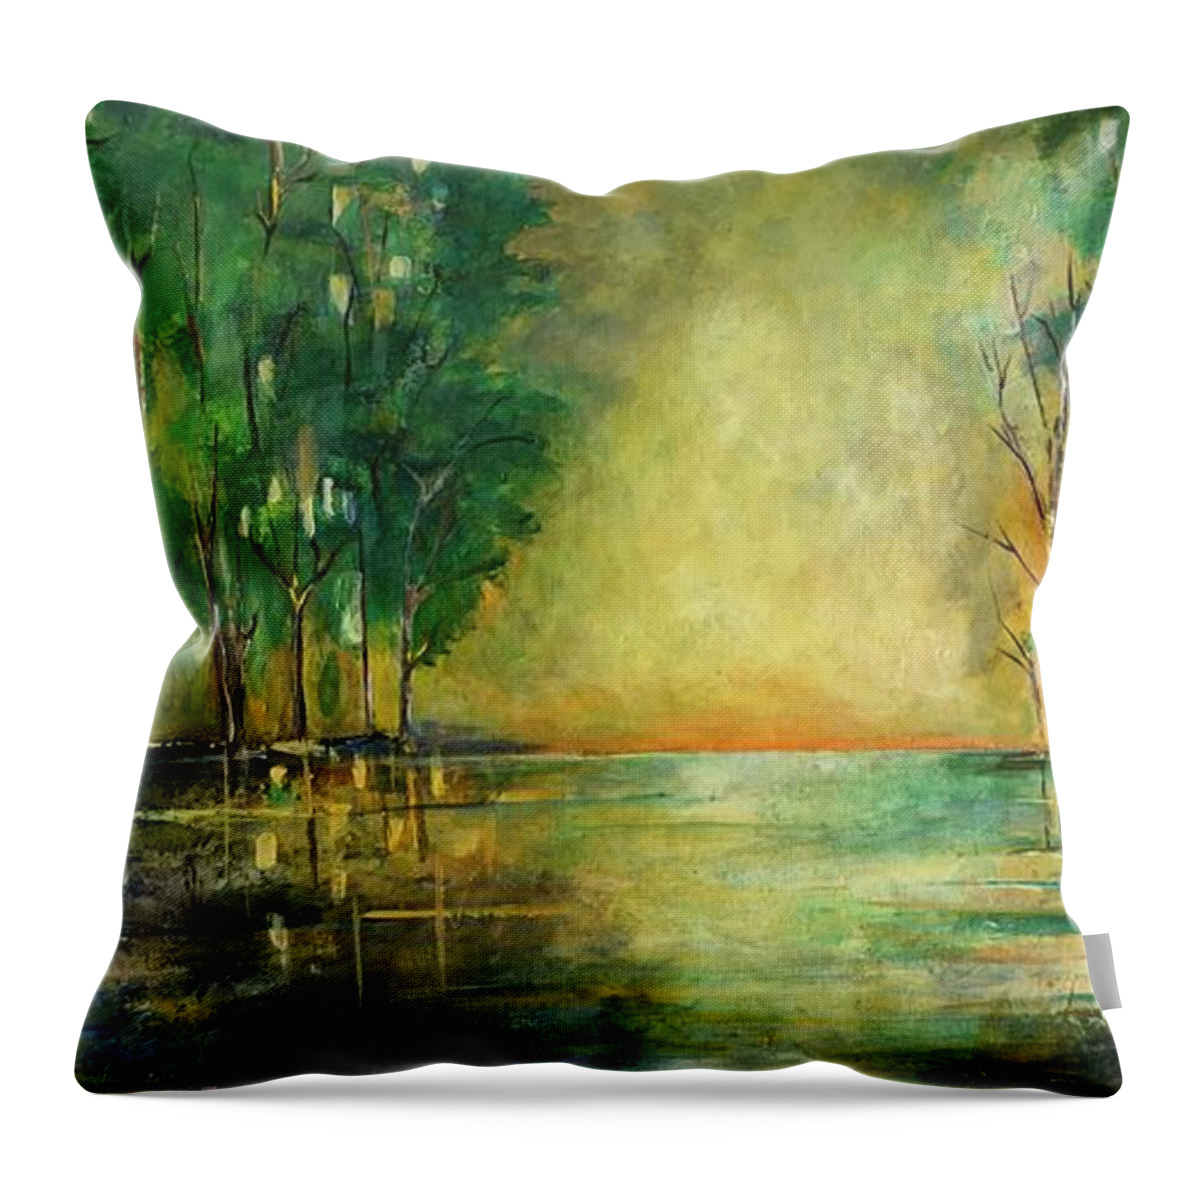 Original Acrylic Painting Throw Pillow featuring the painting Green Bayou by Maria Karlosak